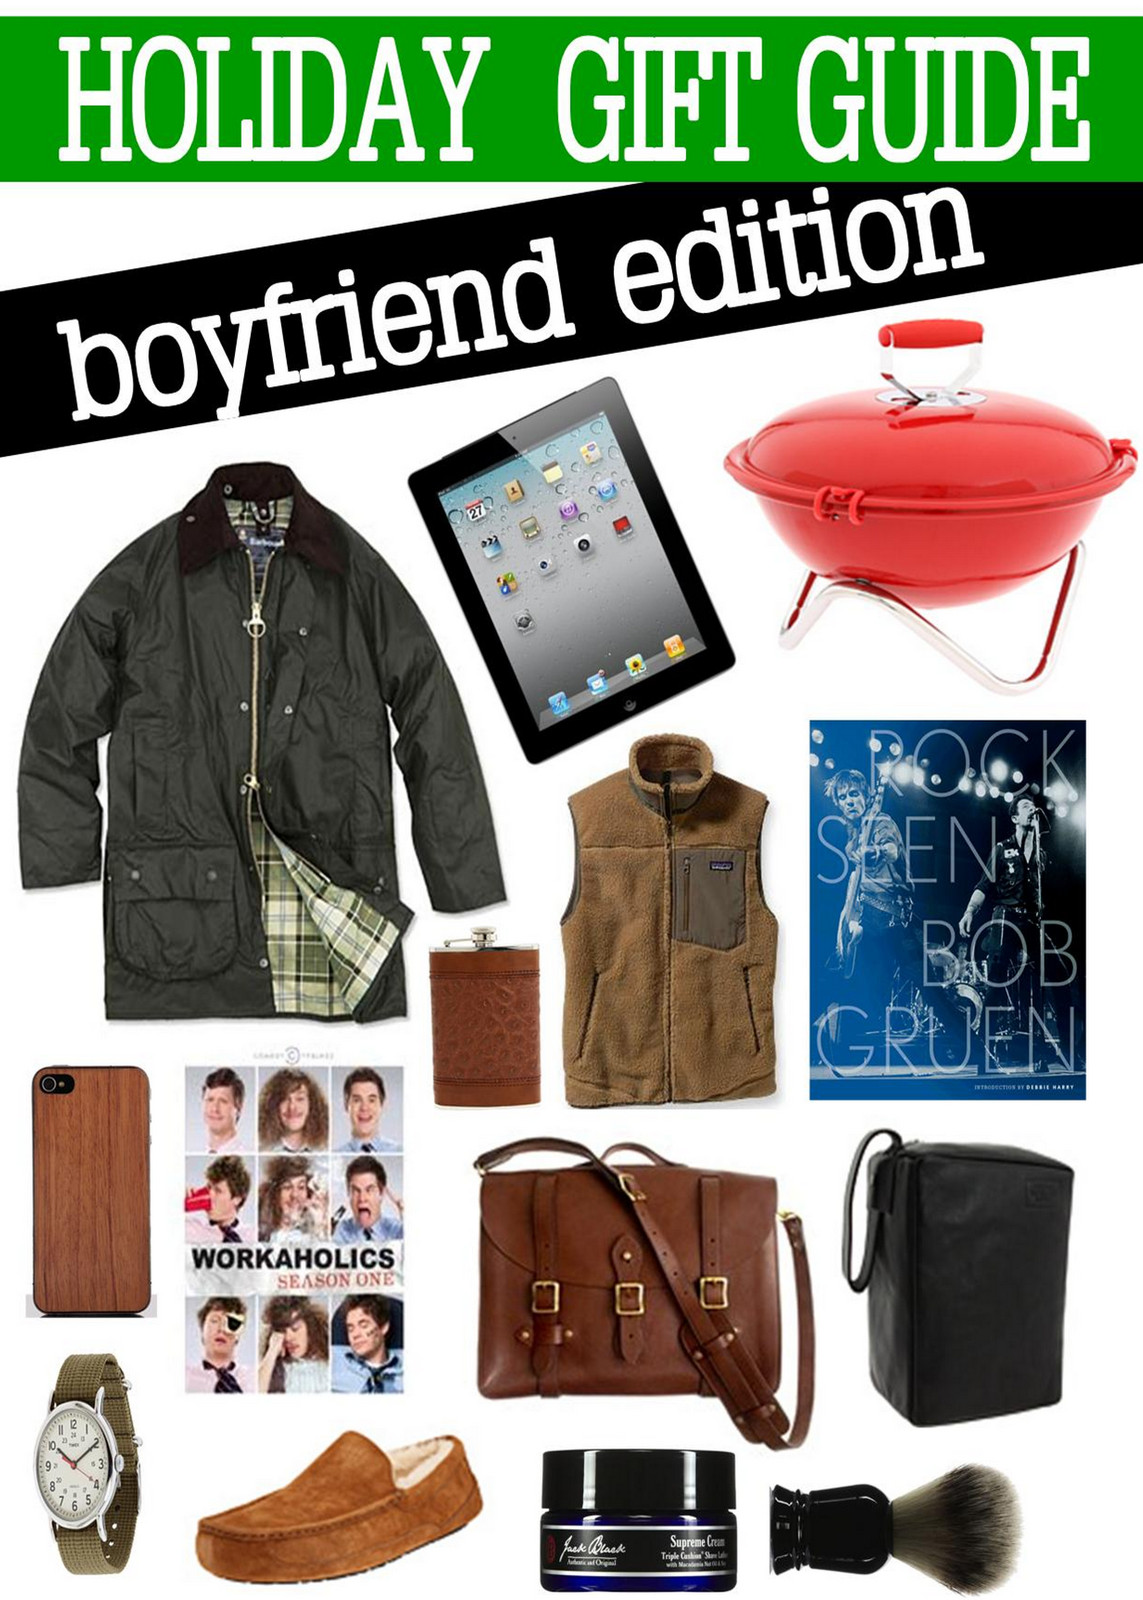 Good Gift Ideas For Your Boyfriend
 Good Gifts for Your Boyfriend